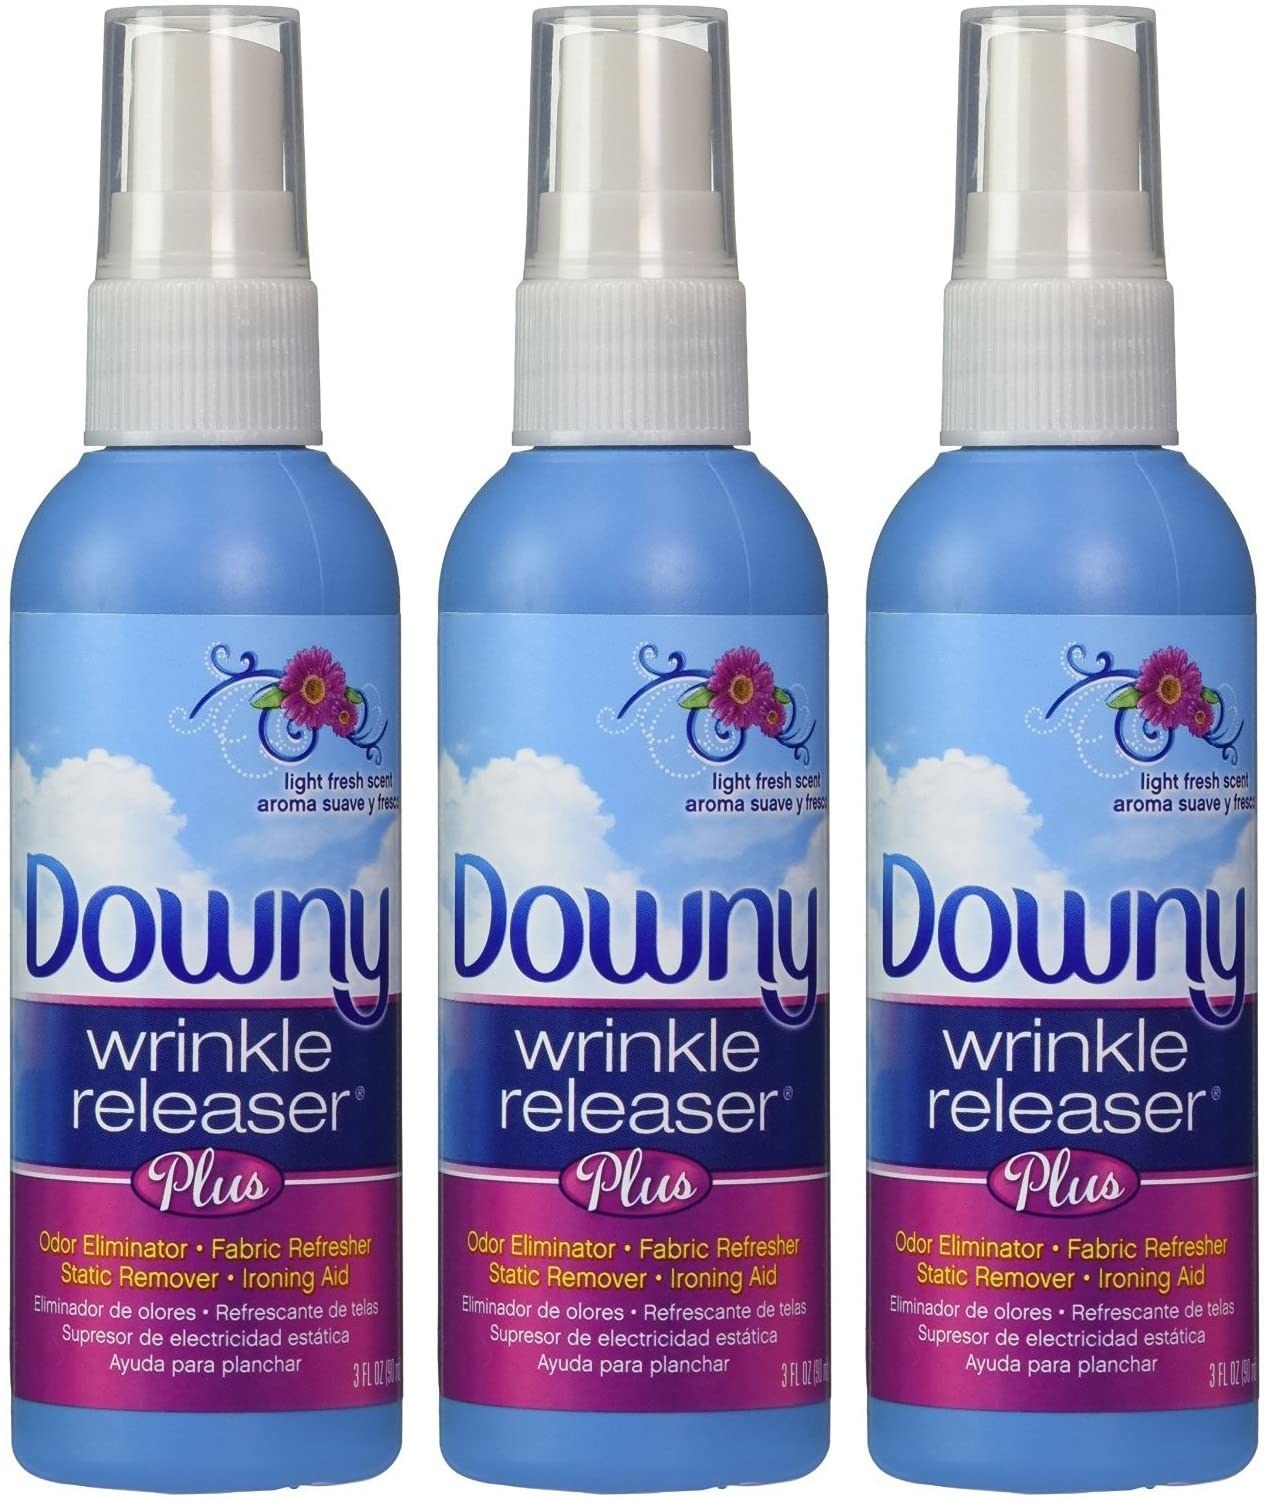 Three small bottles of wrinkle release spray